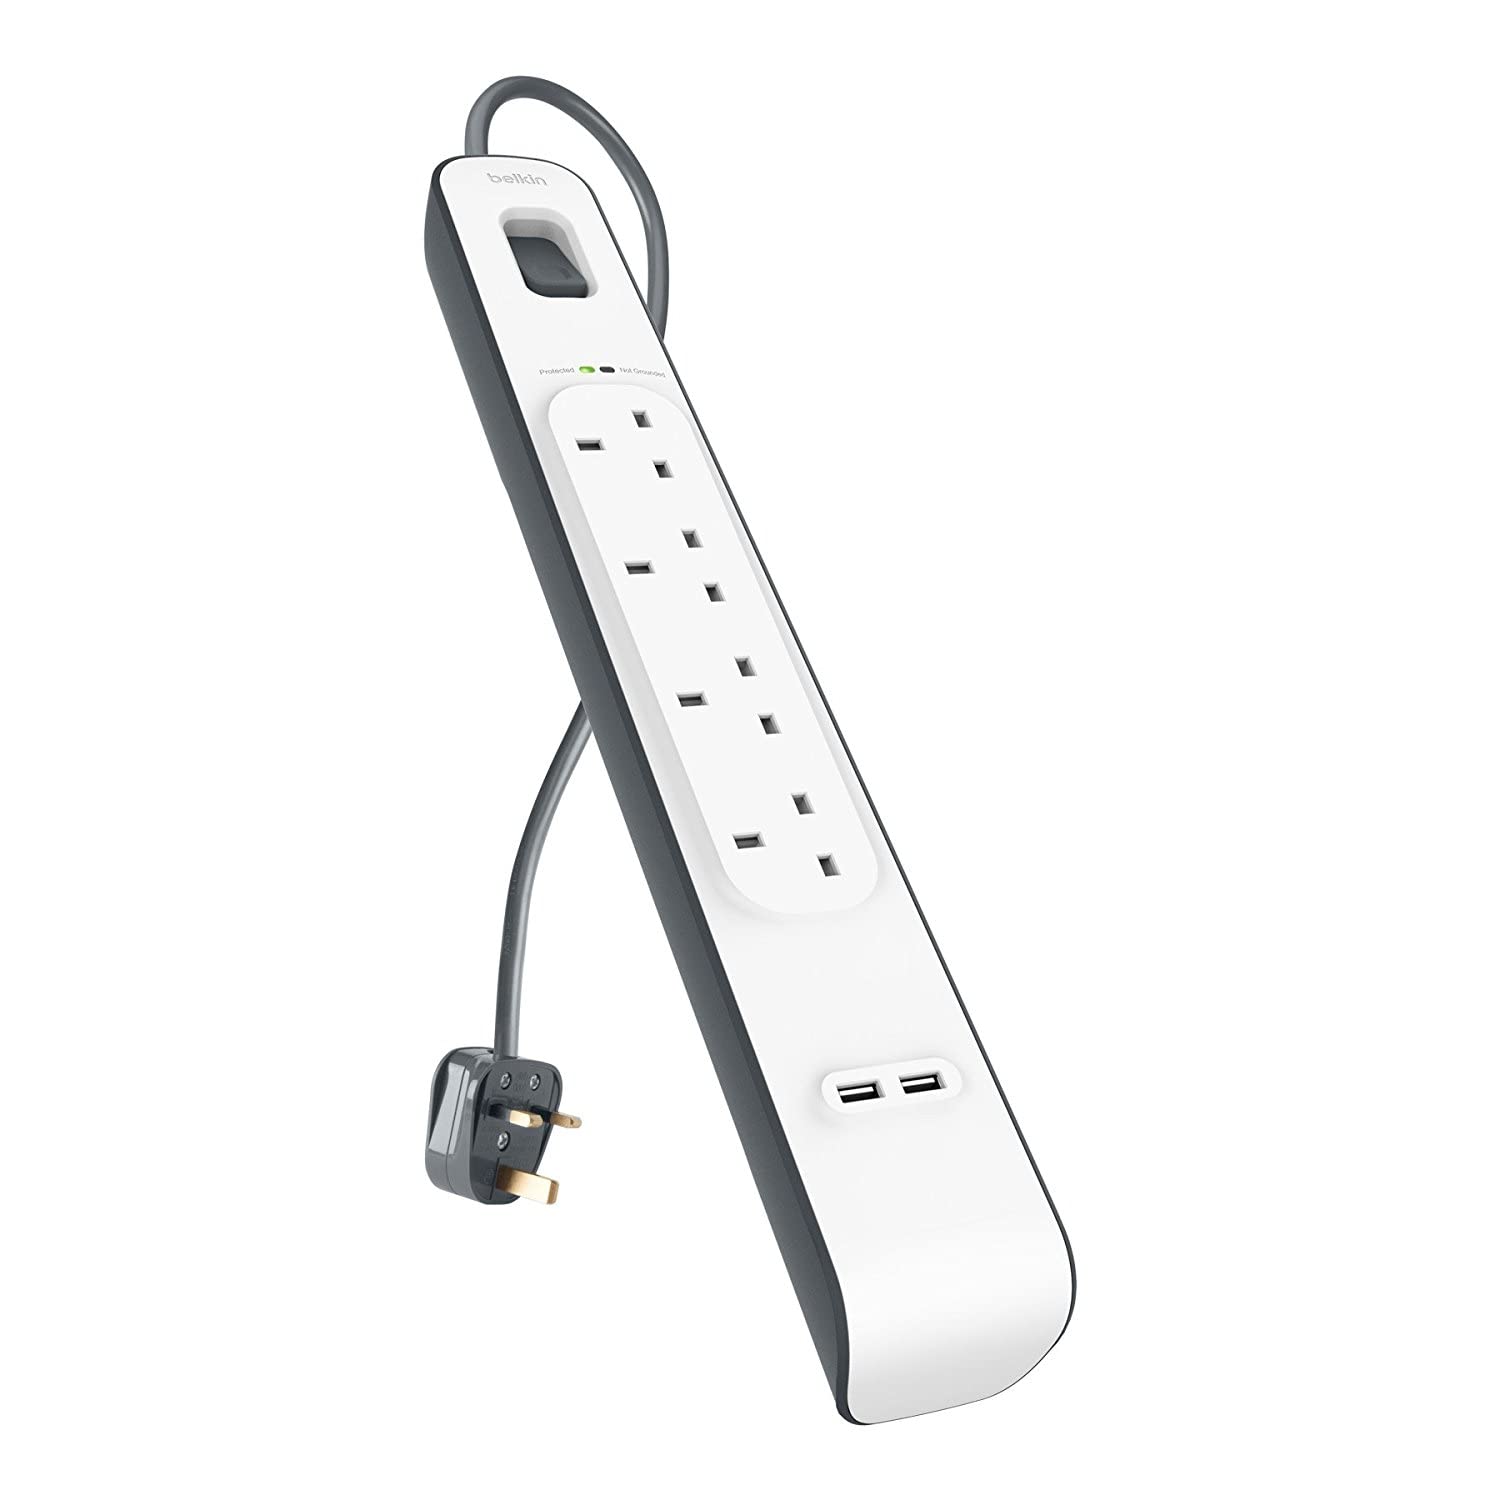 Belkin SurgePlus 4 Way Extension with Dual USB outputs